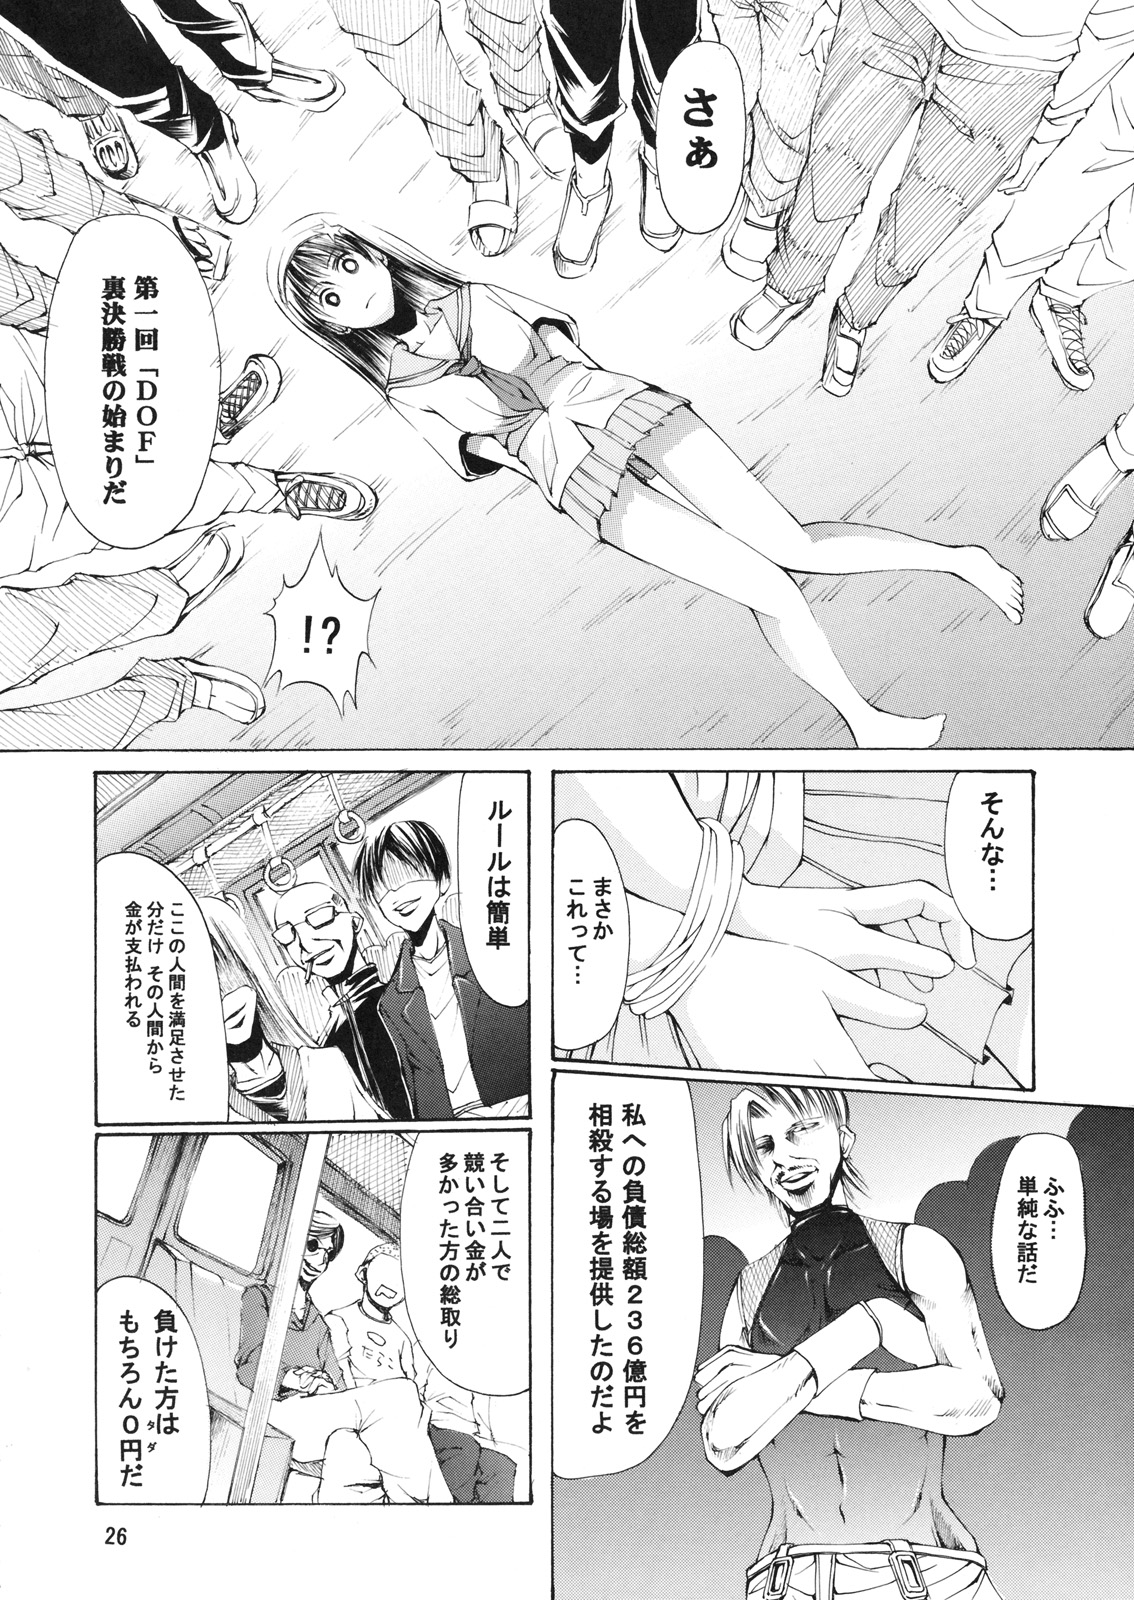 [3g (Junkie)] DOF Mai (King of Fighters) page 25 full